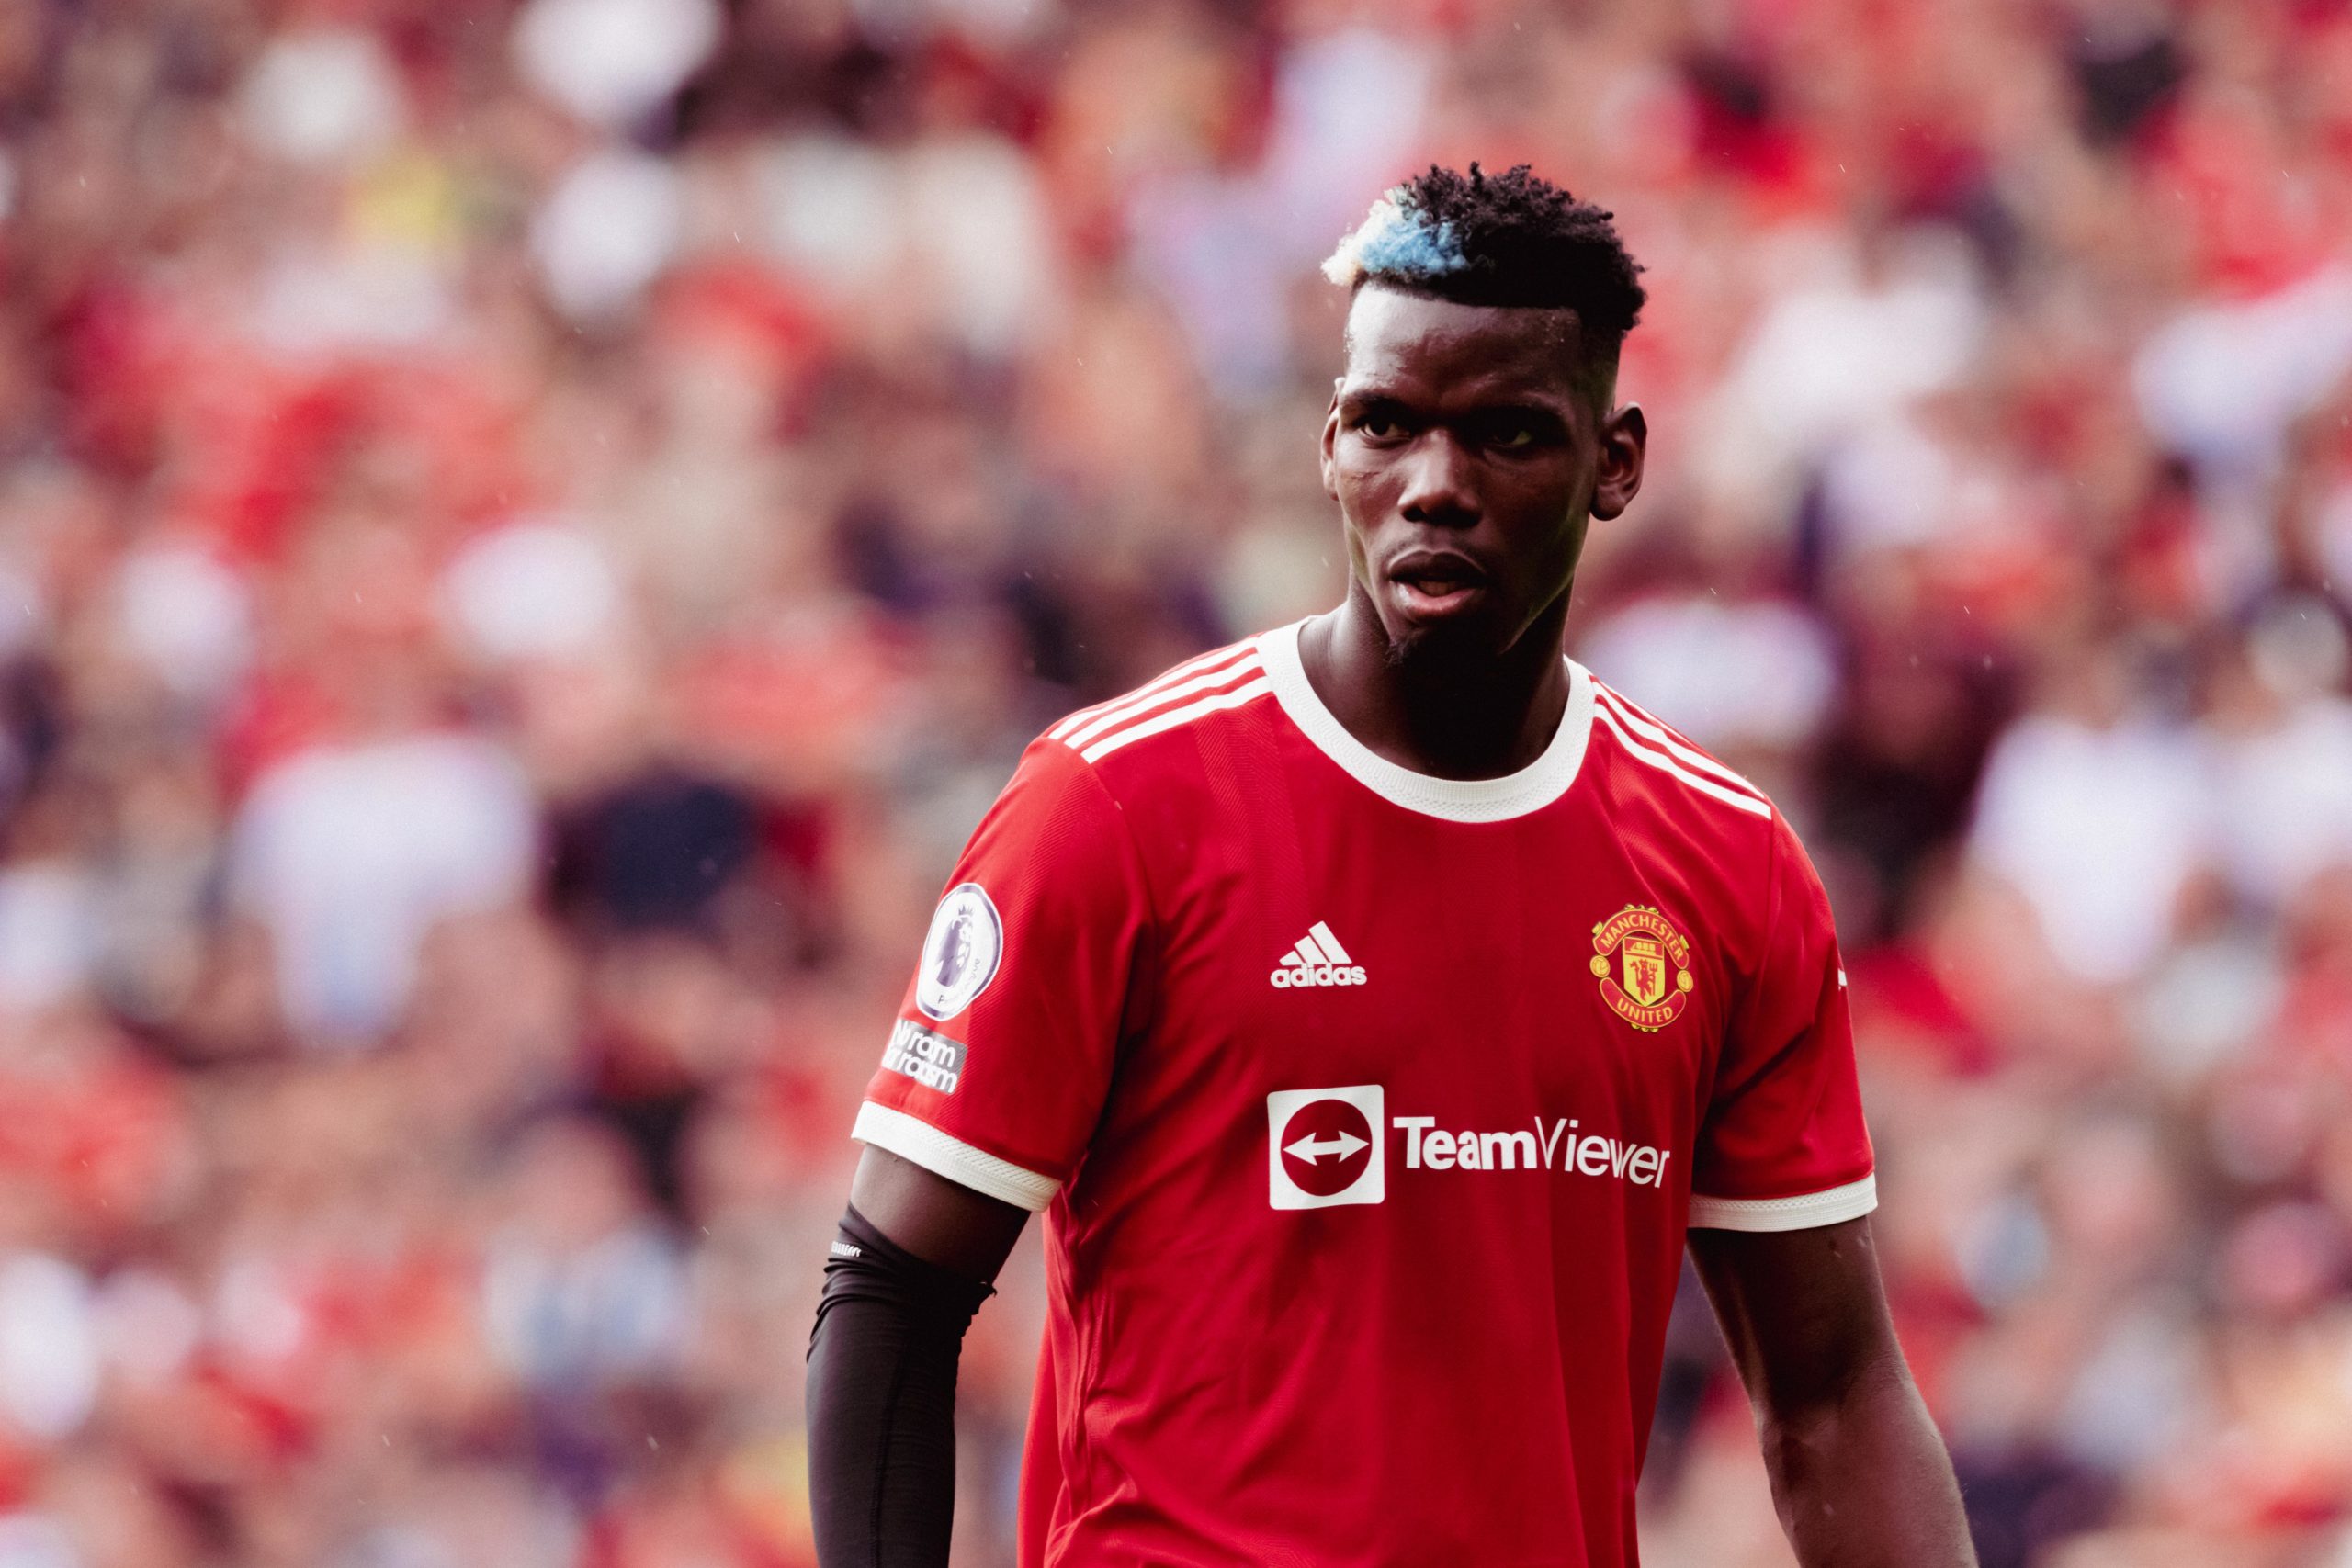 Report: Pogba wanted to sign long-term extension in 2020 and board denied him